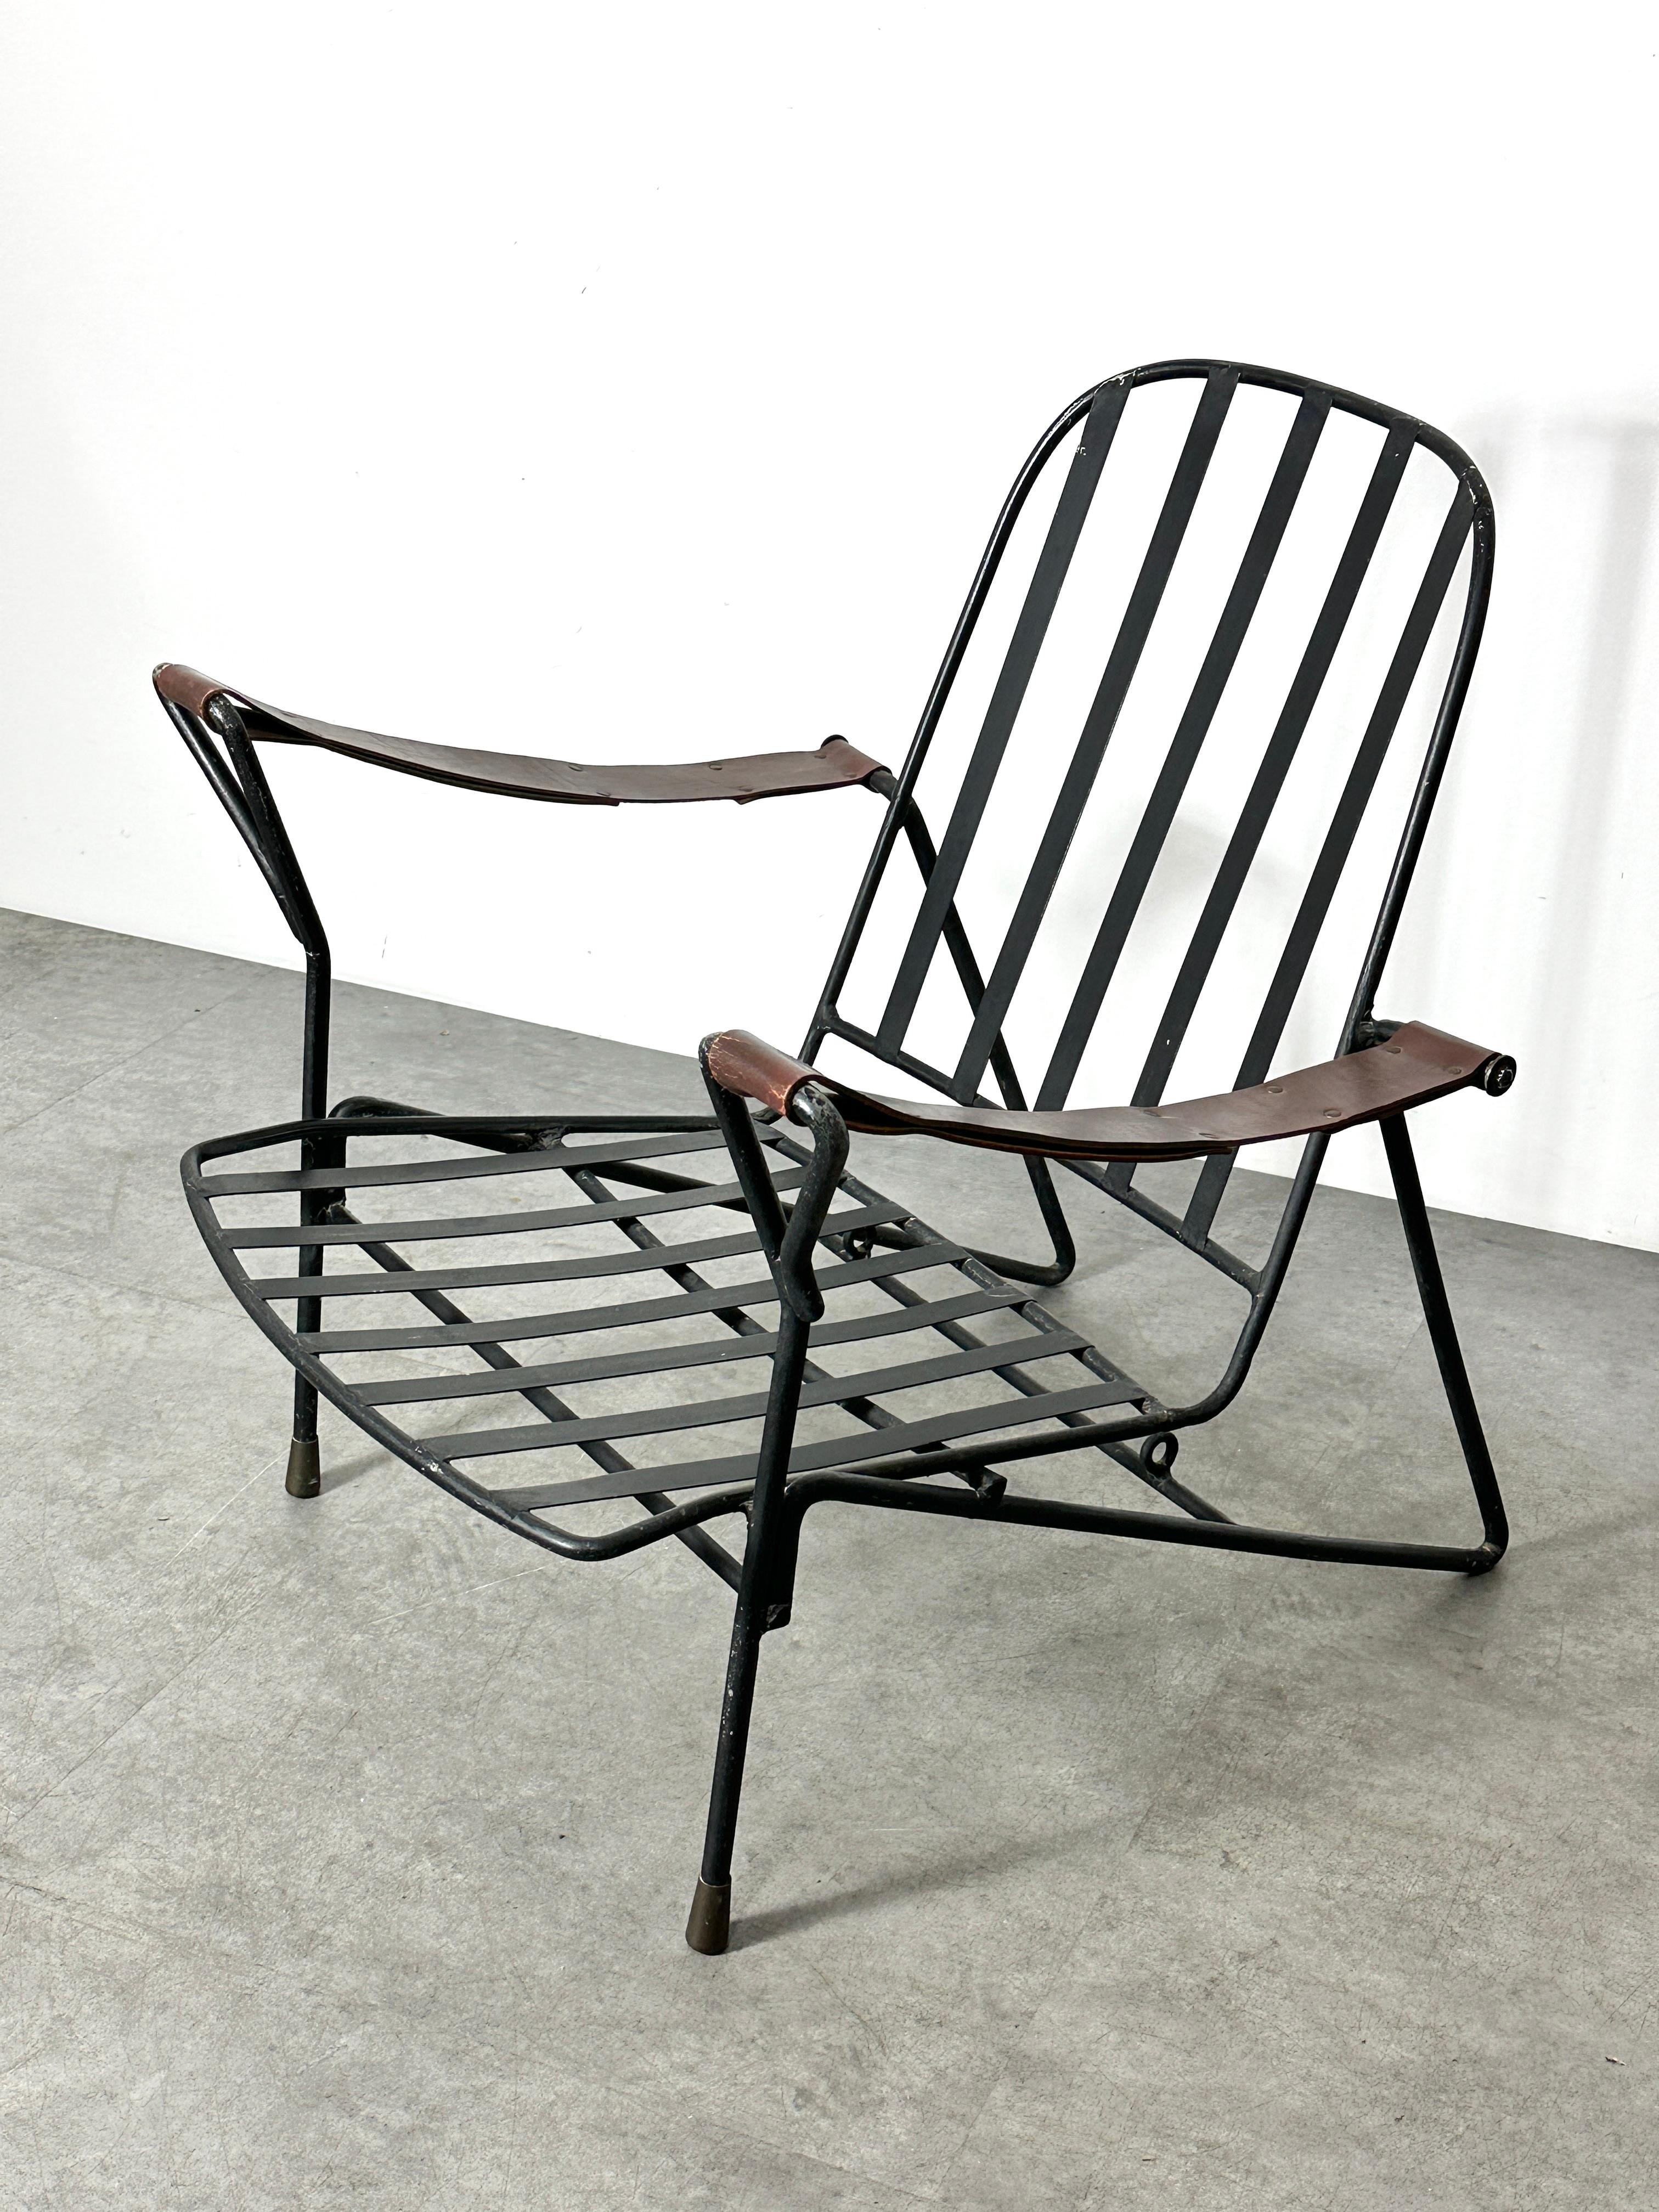 Steel A Pair of Vintage Mid Century Mexican Modern Iron Leather Lounge Chairs 1950s For Sale